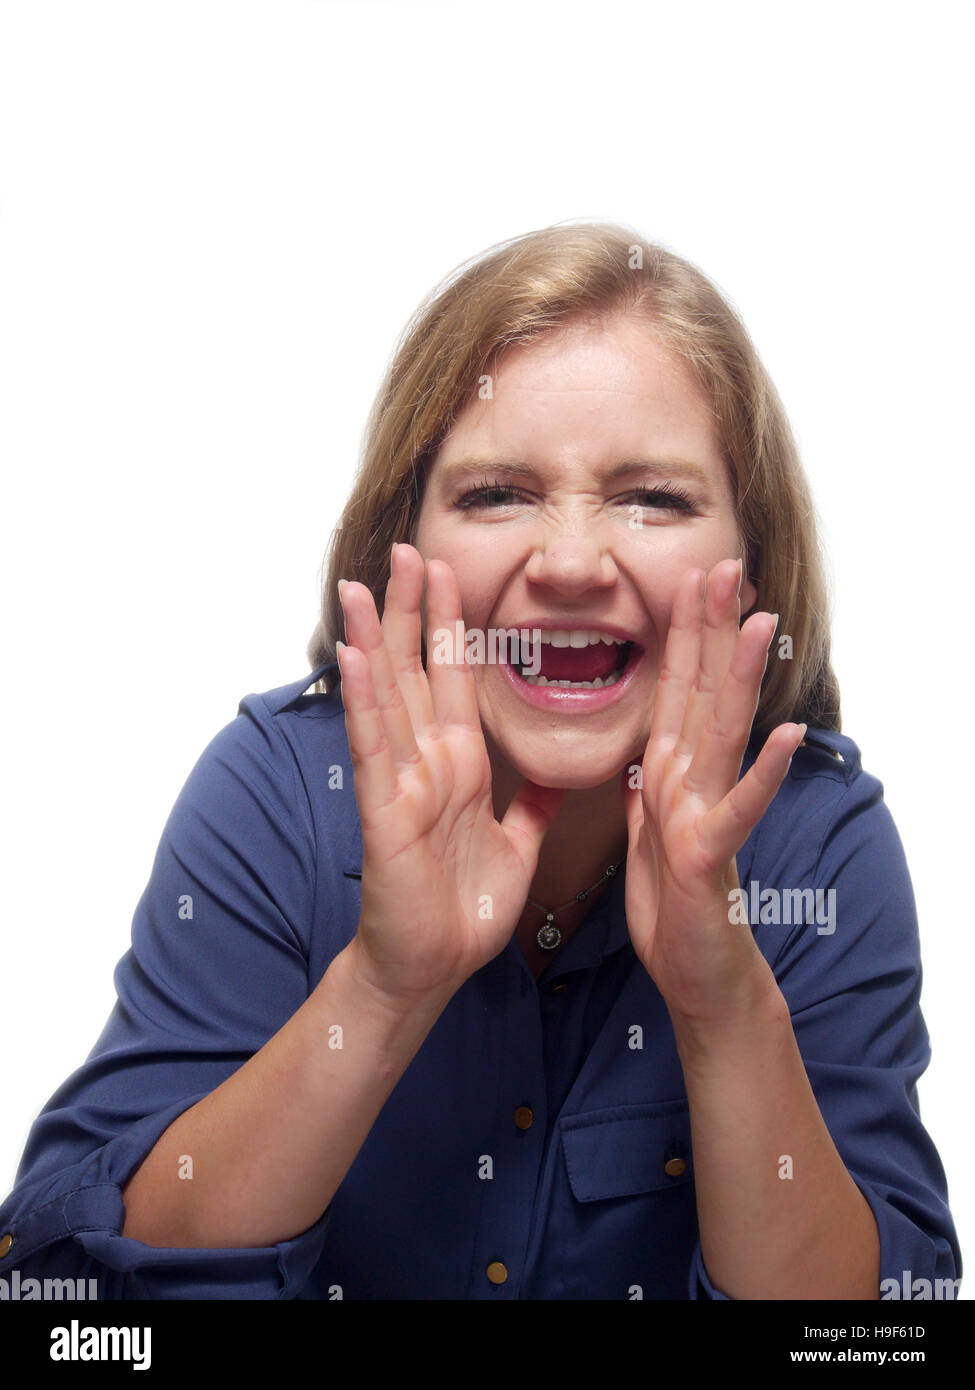 A blond woman is shouting out loudly. Stock Photo